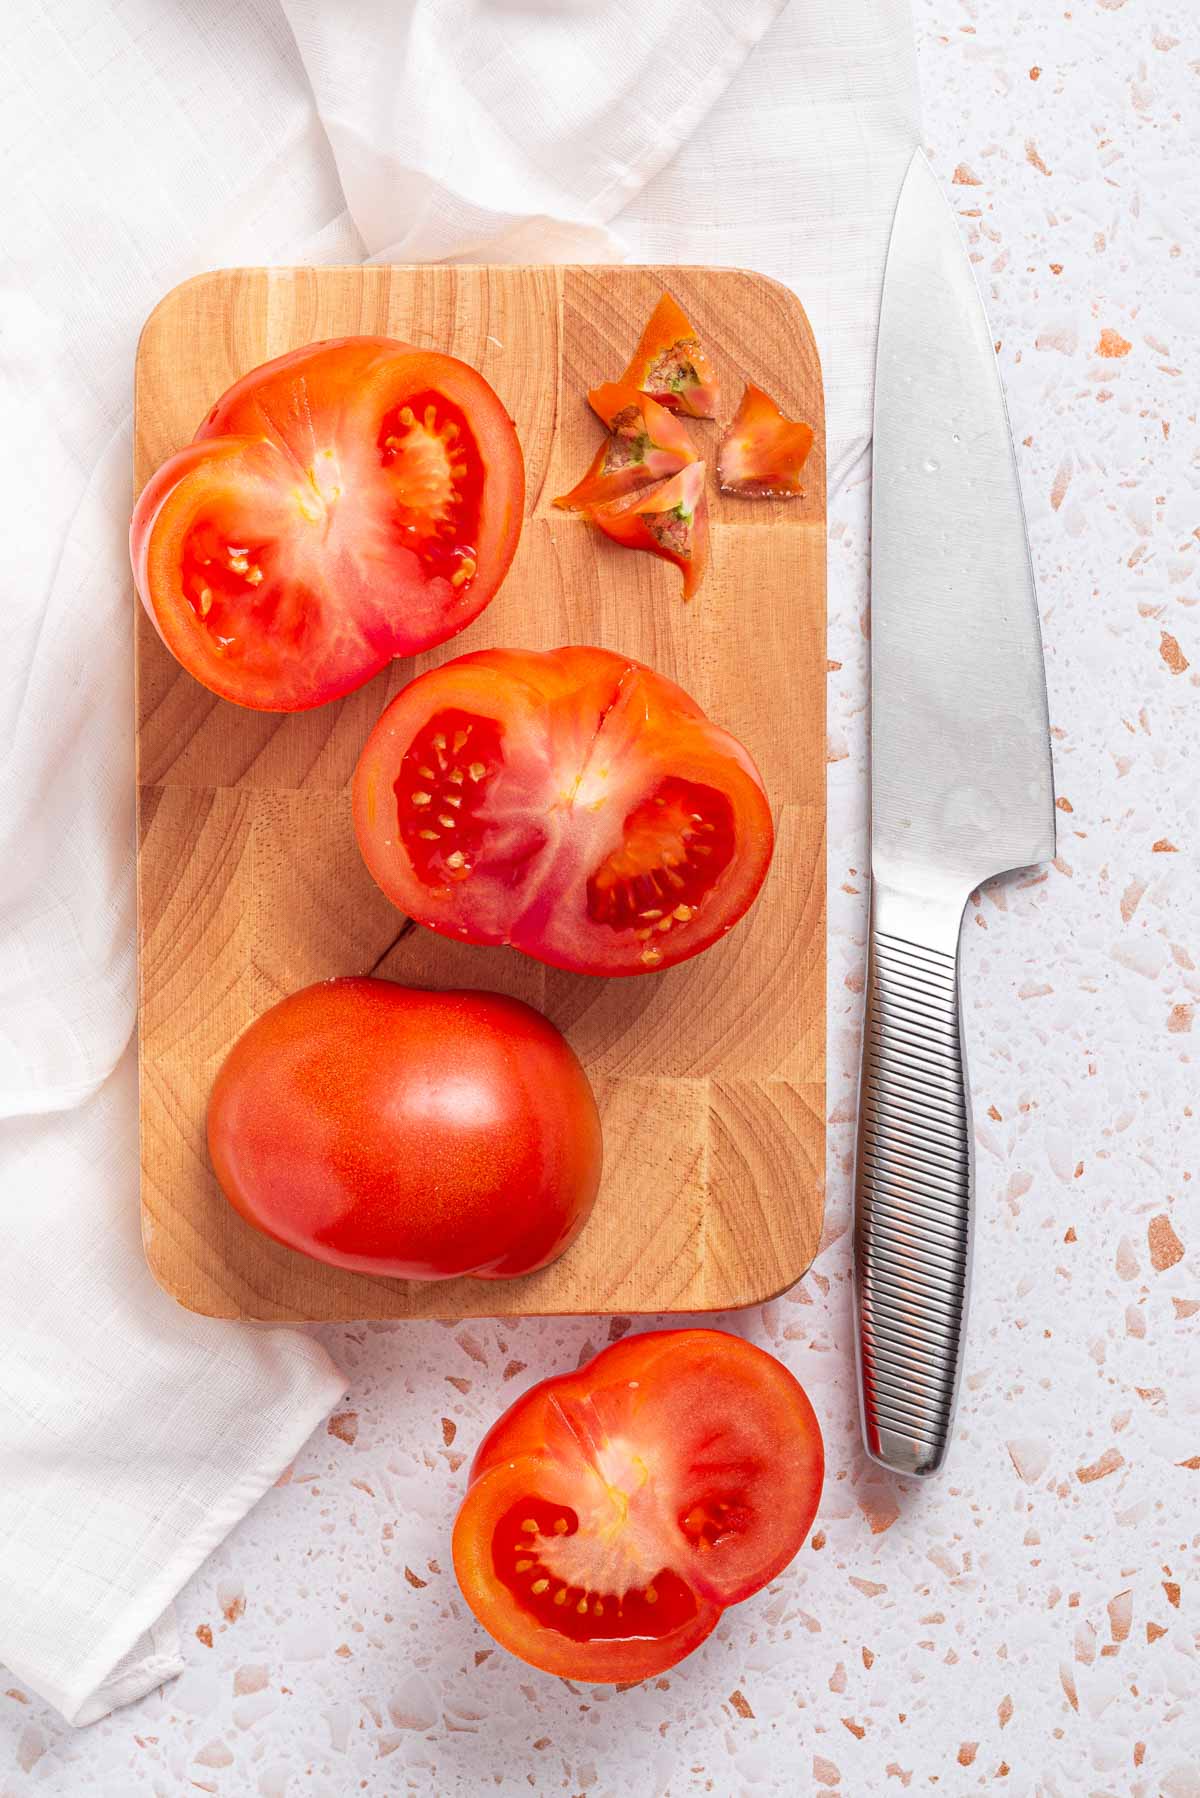 Sliced tomatoes and a knife on a cutting board.